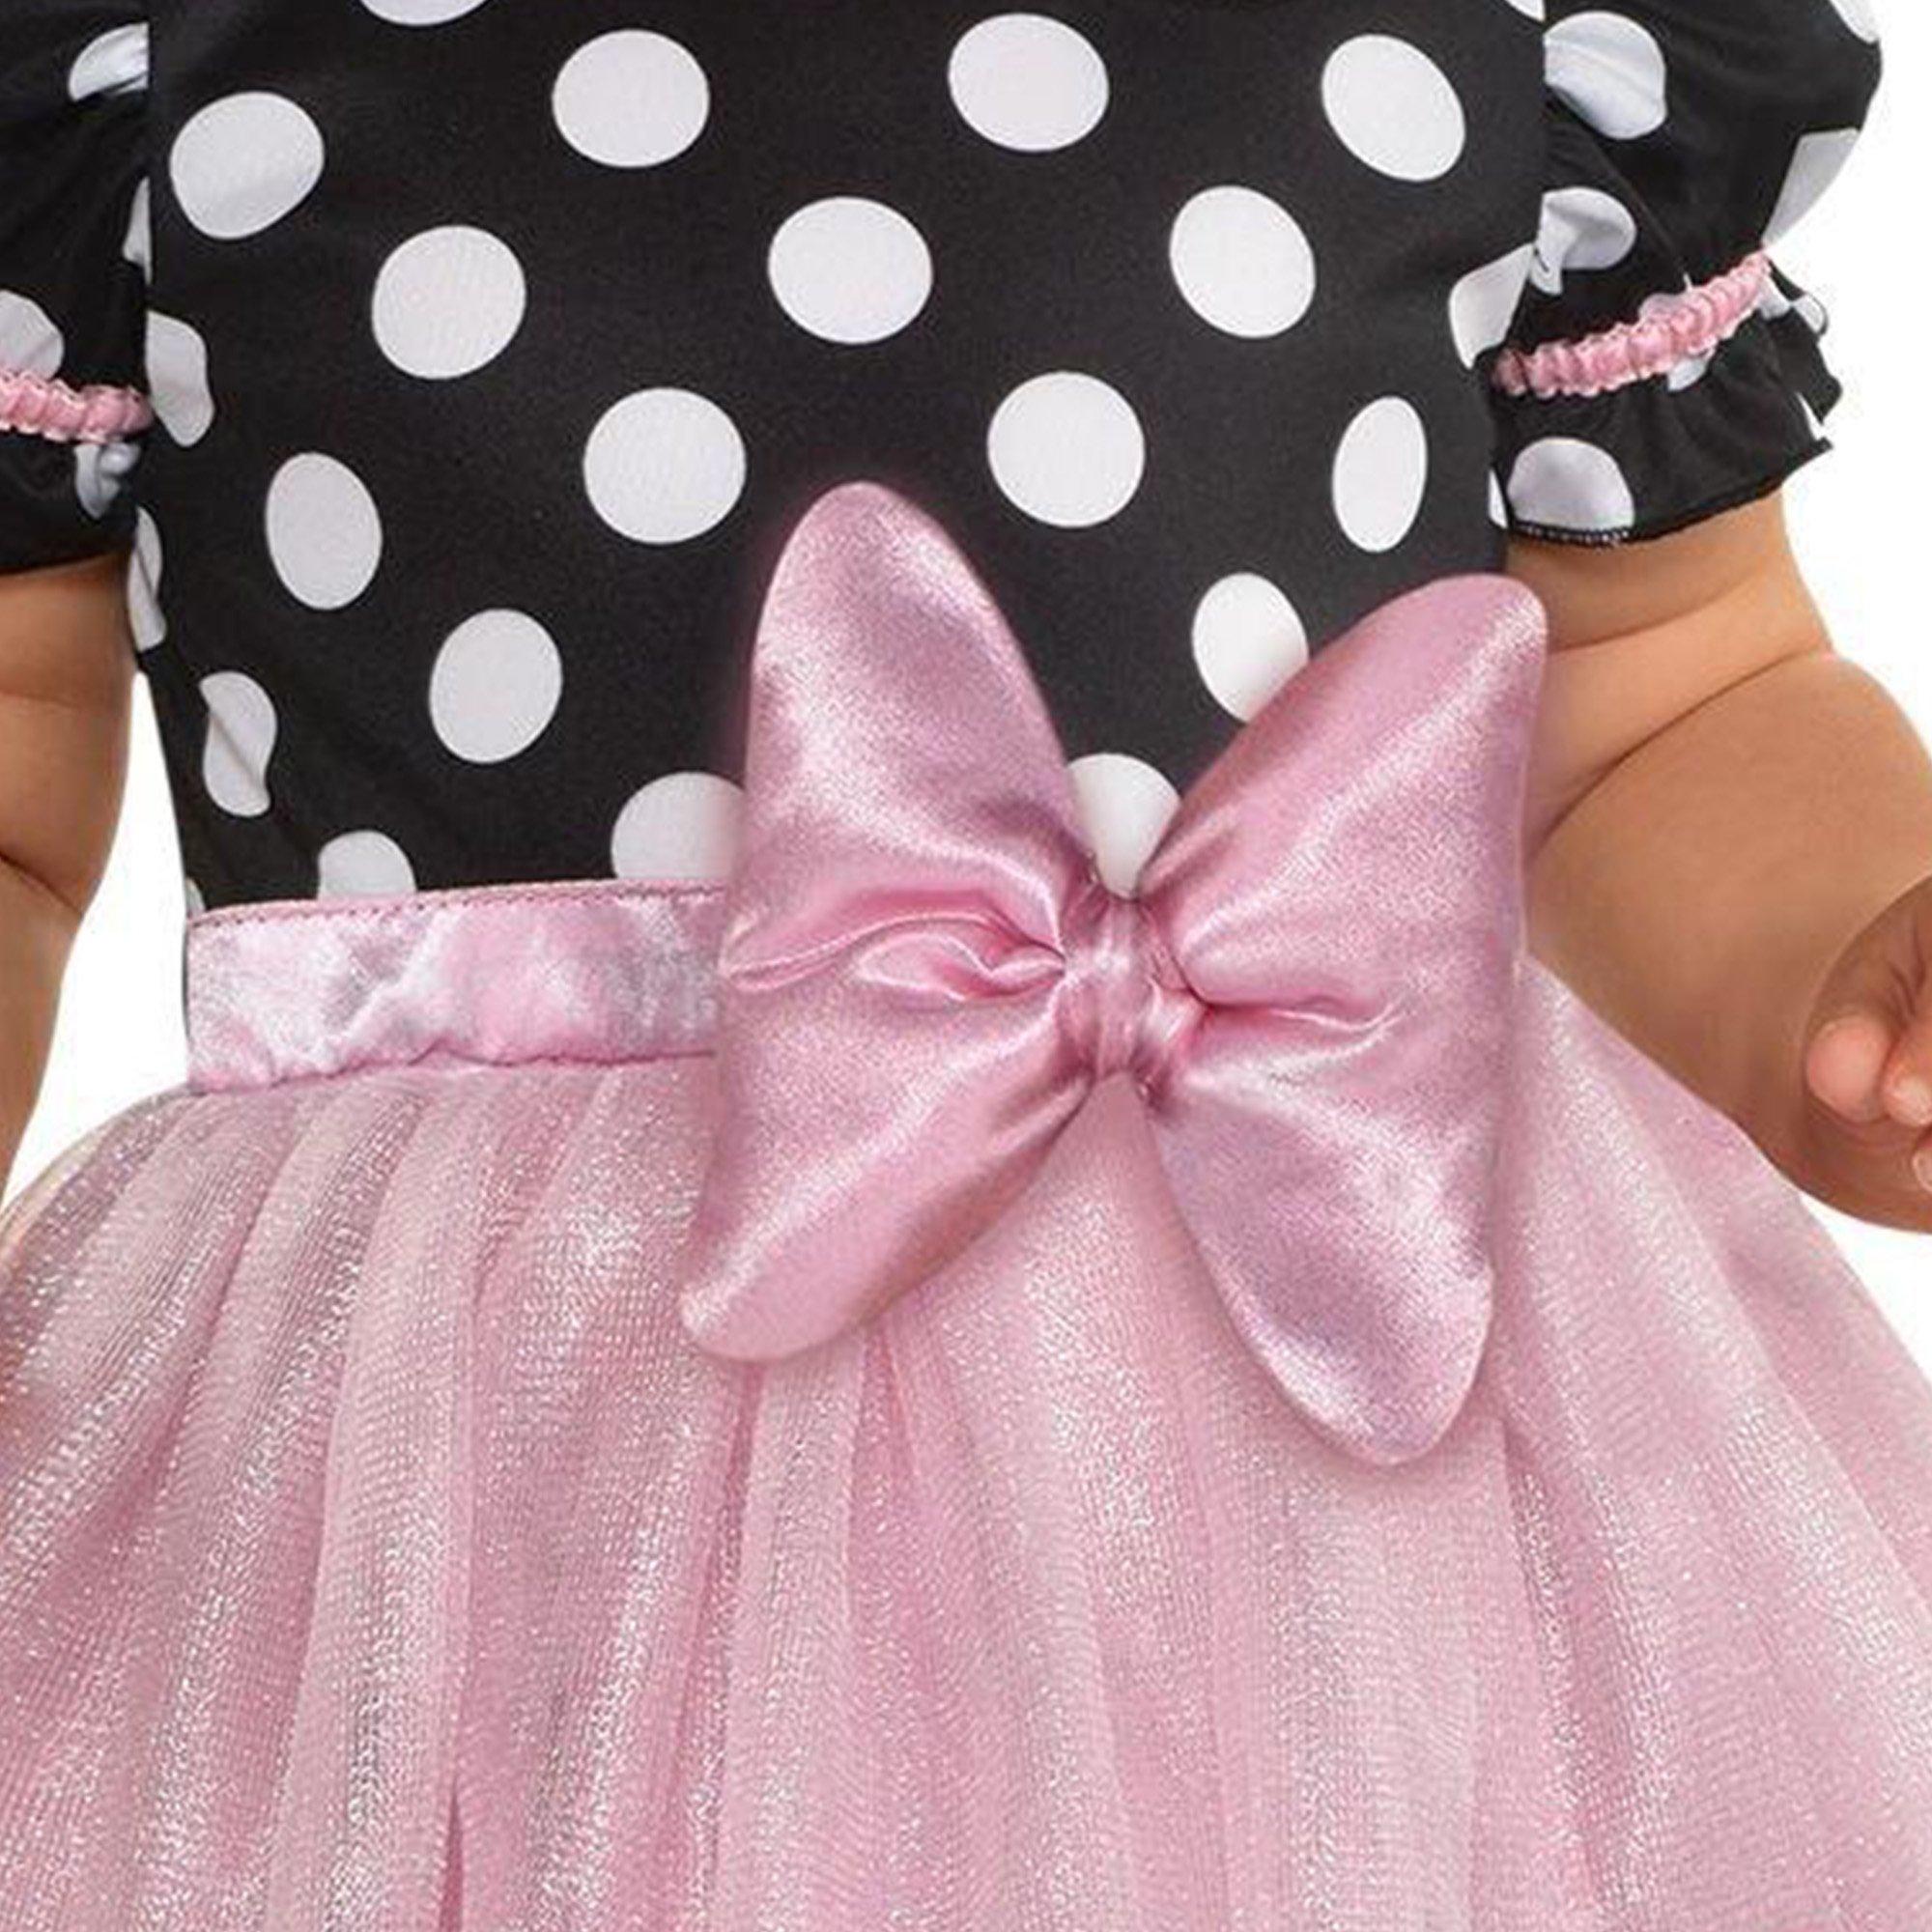 Baby Pink Minnie Mouse Costume - Disney